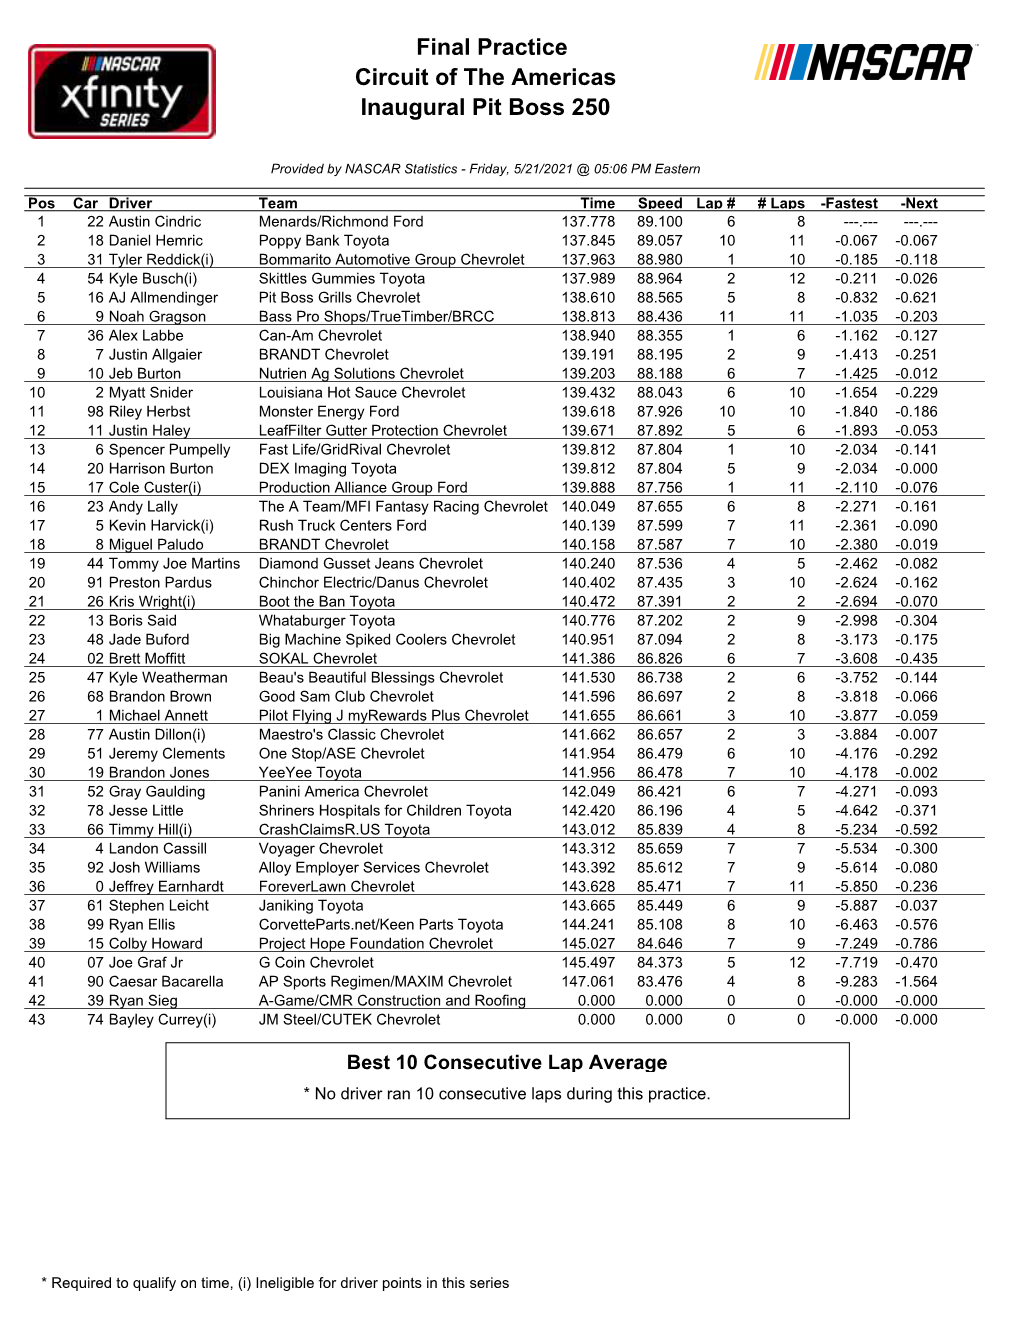 Final Practice Circuit of the Americas Inaugural Pit Boss 250